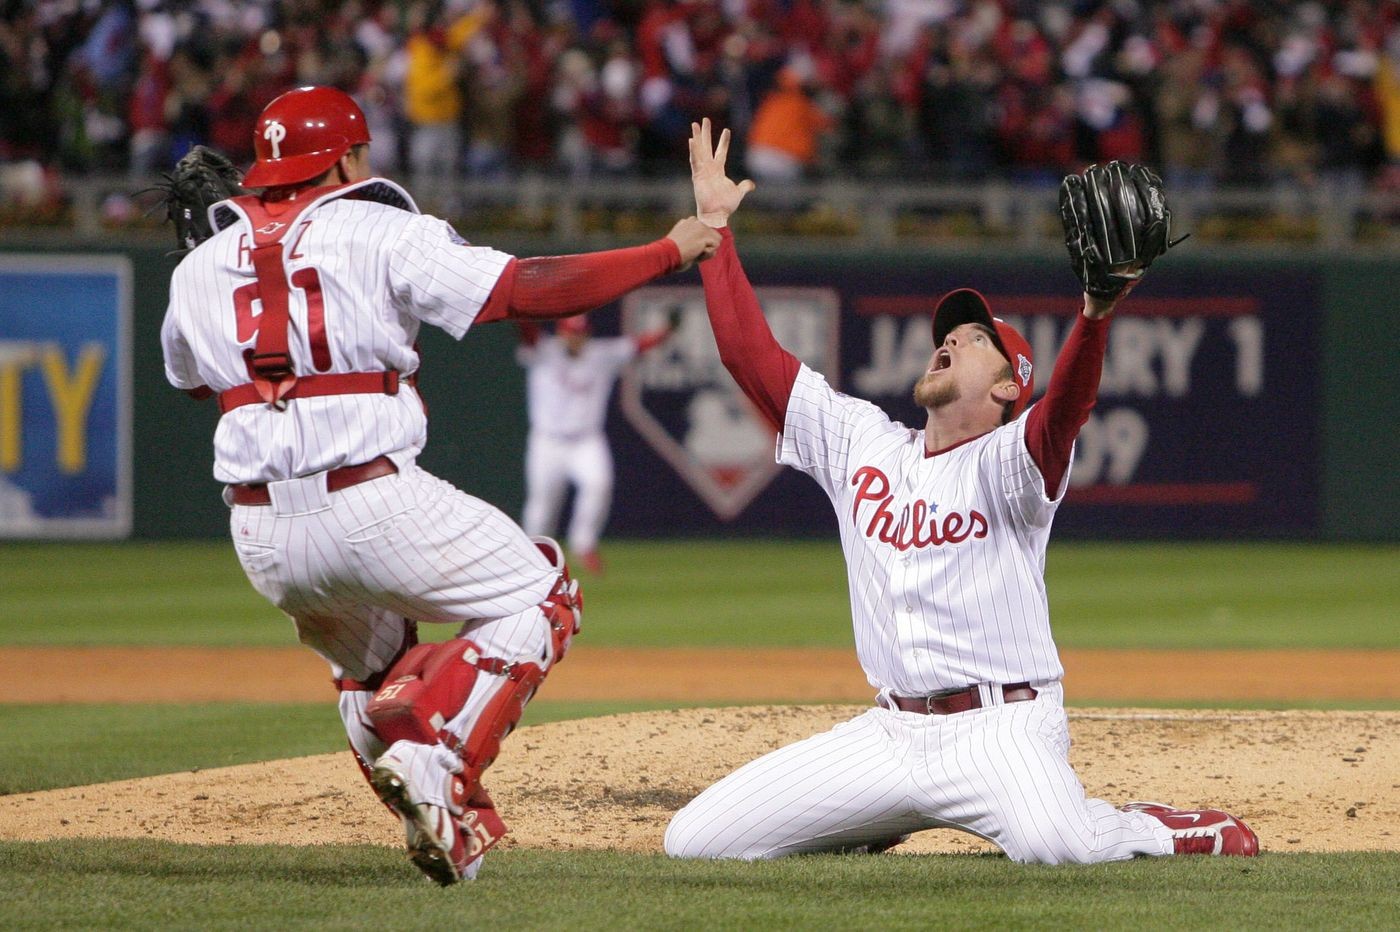 Looking back 10 years ago today, the Phillies won the World Series